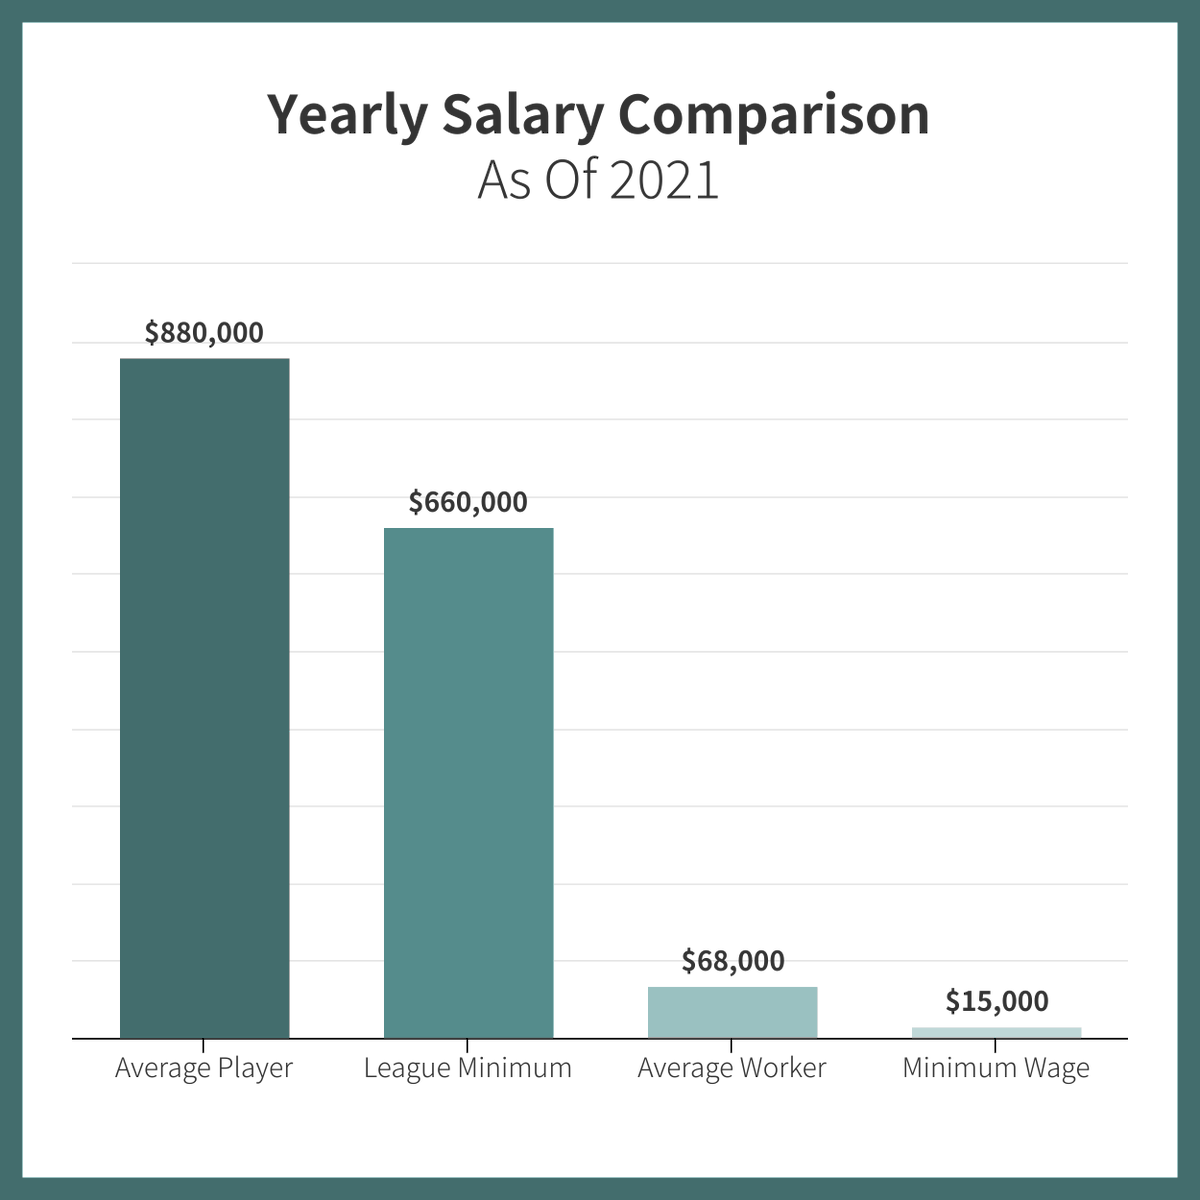 Every player in the NFL should make AT LEAST the league minimum of $660k per year, which is nothing to turn your nose at. Some quick math shows us that players who earn league minimum still make about 10x more than an average worker does each year.